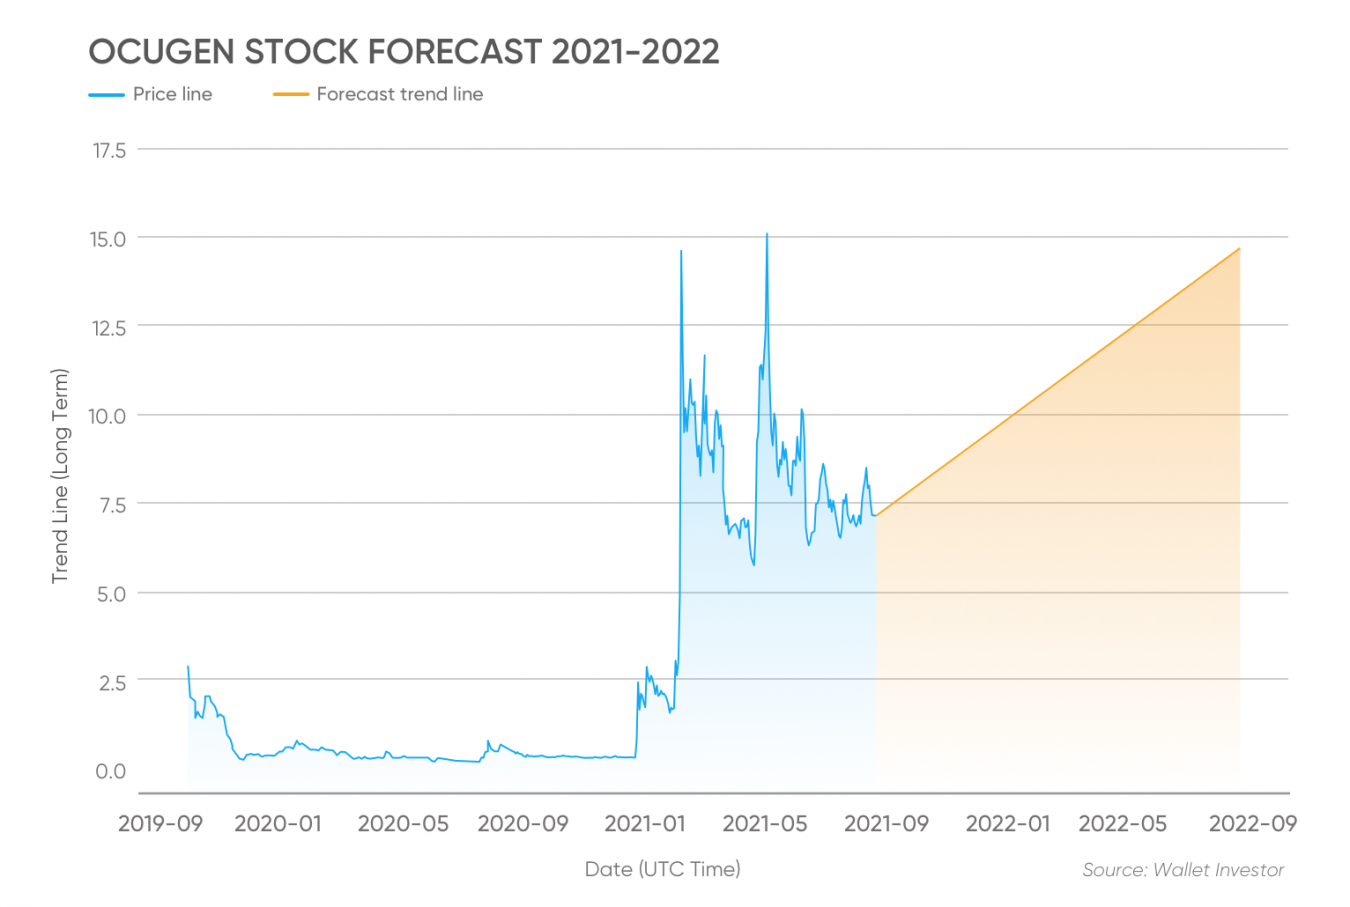 Ocugen (OCGN) stock forecast is there potential for growth?